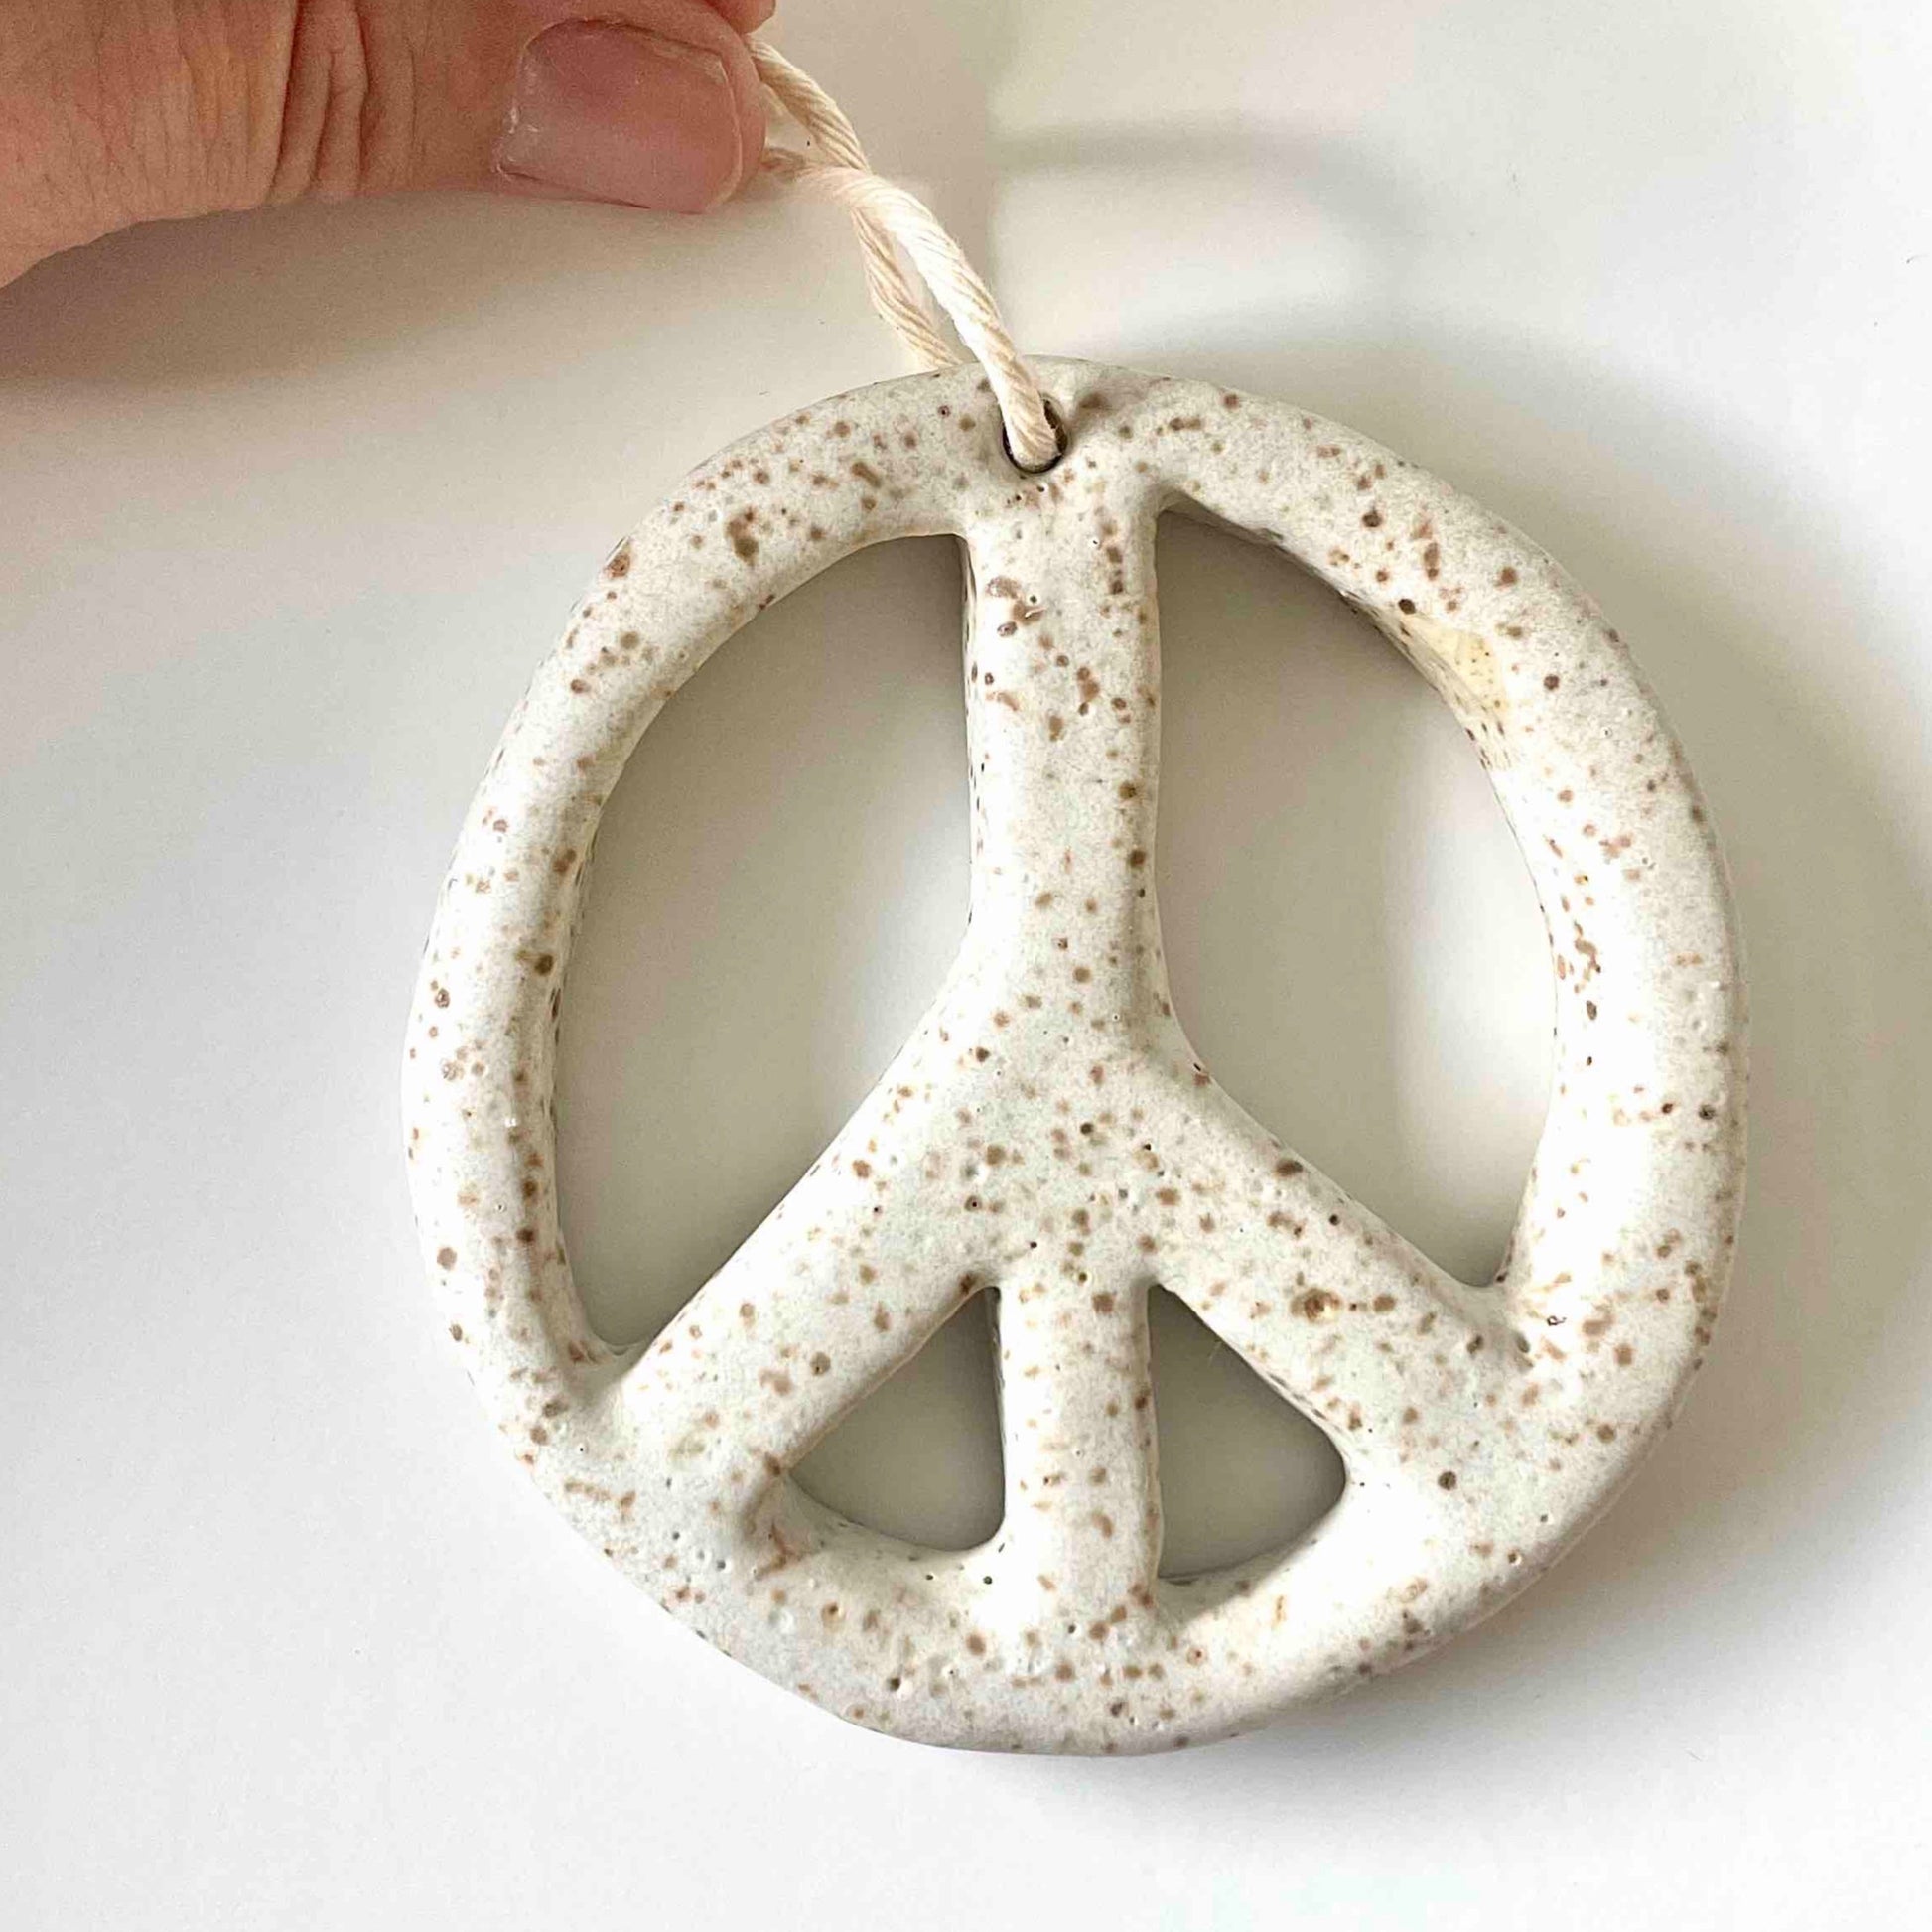 Peace Ornament in Speckle - Hey Moon Ceramics